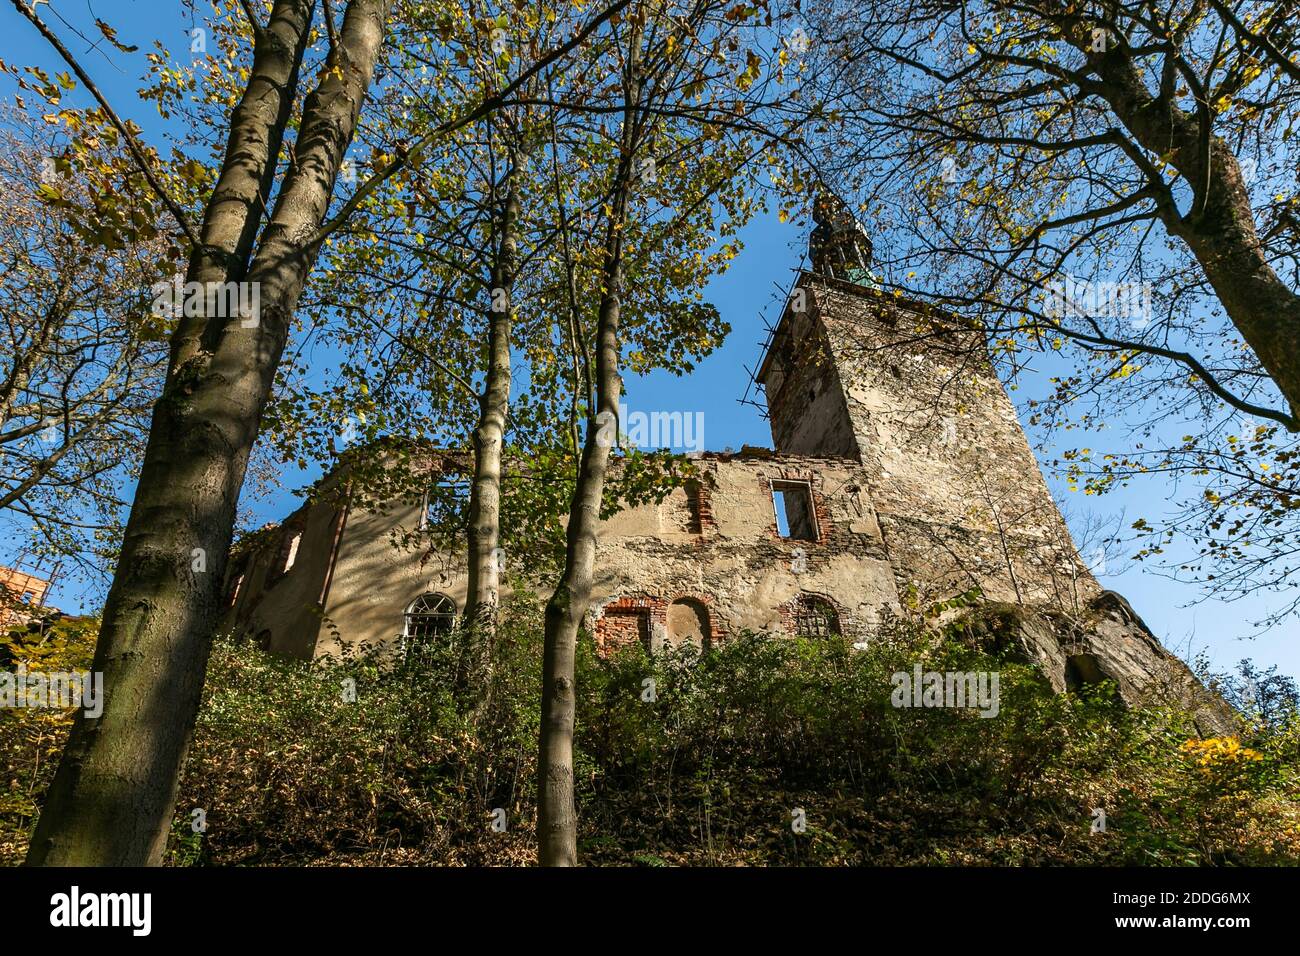 Hartenberg, Czech Republic - October 14 2018: View of the ruined gothic castle standing on a rocky hill surrounded by trees. Bright sunny autumn day. Stock Photo